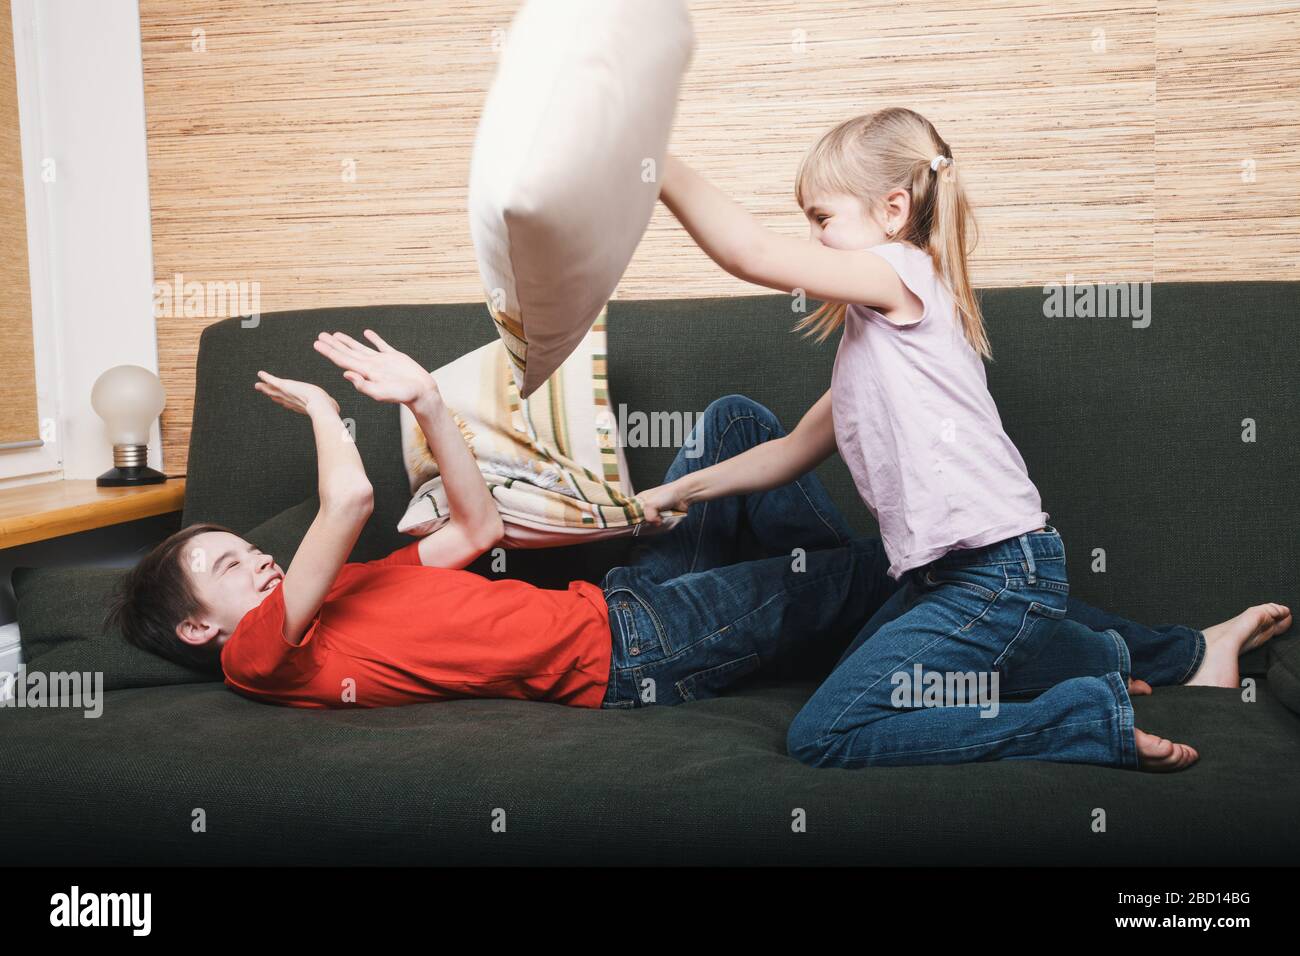 Siblings going mad stuck at home being in self-isolation. Children fighting with pillows on a couch. Quarantine and lockdown protective measures again Stock Photo